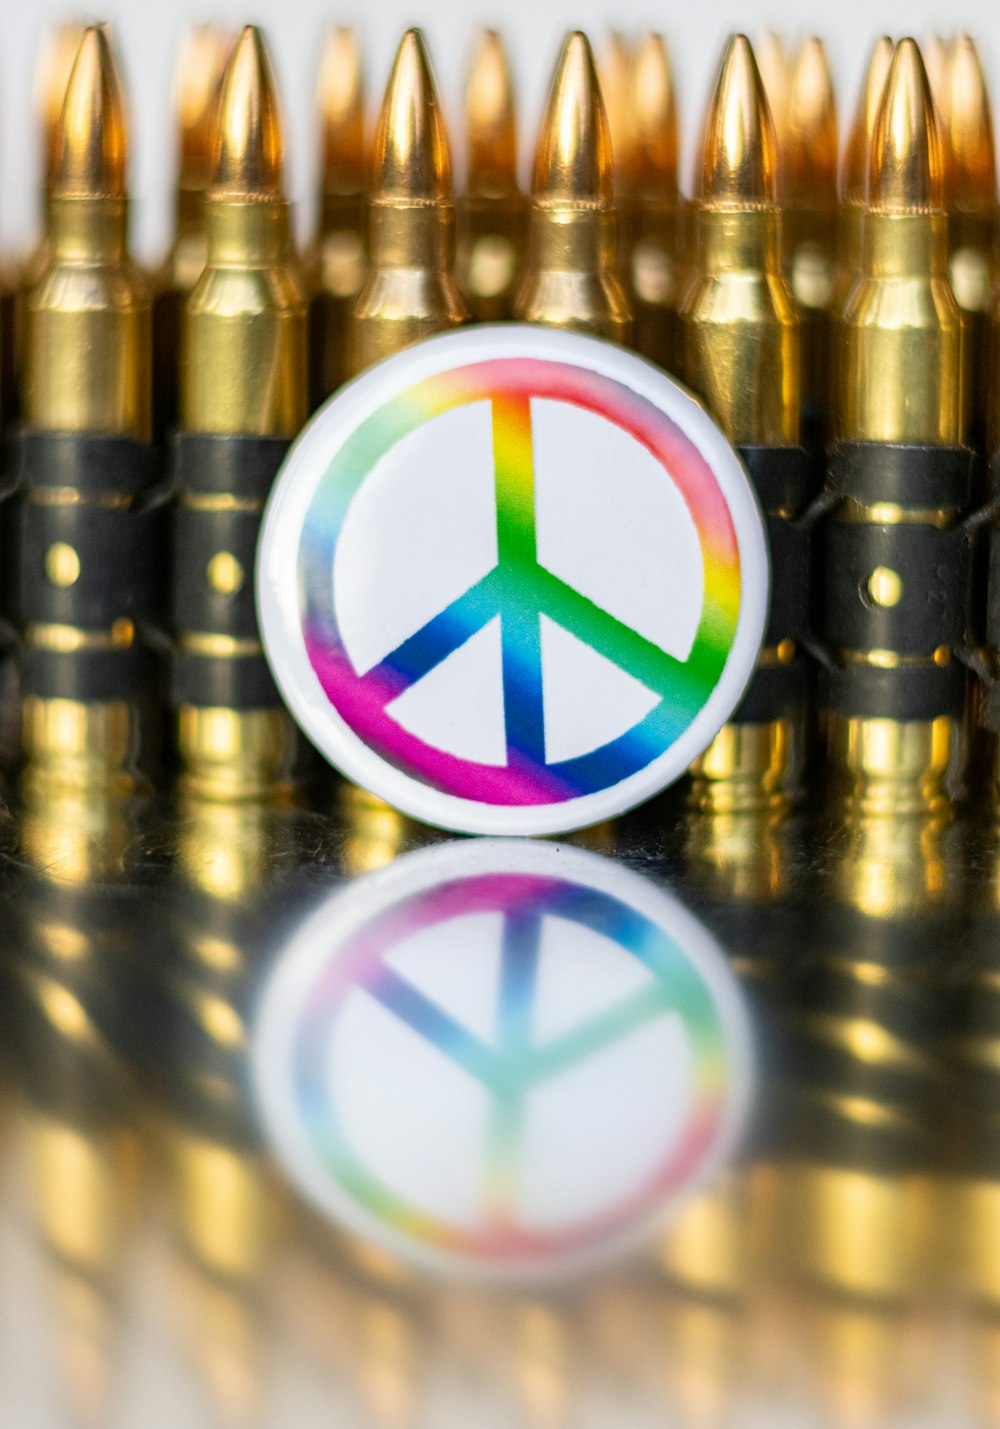 a peace sign sticker on top of a bunch of bullet shells